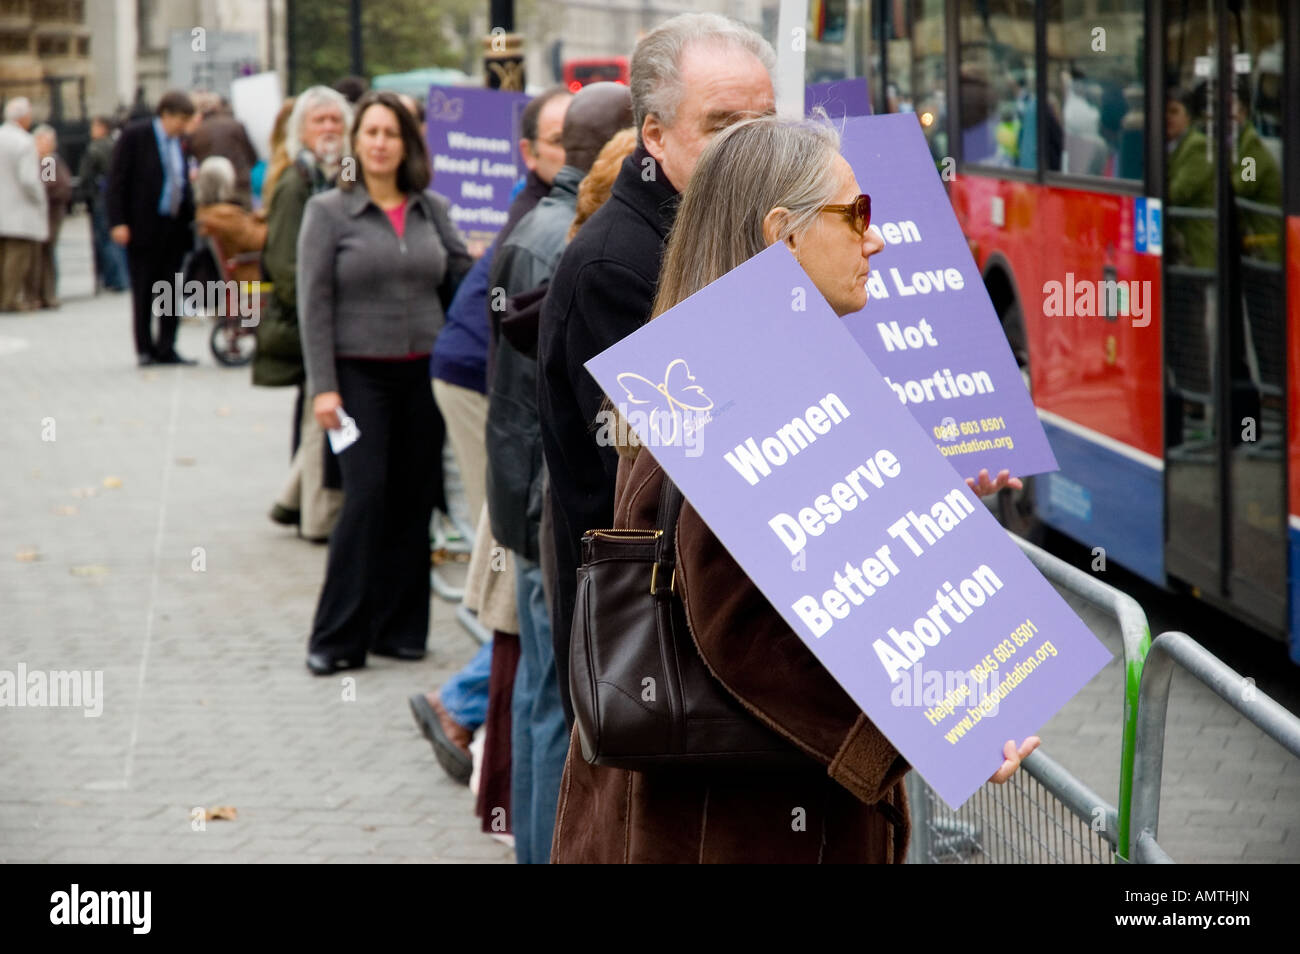 demonstrations about abortion near the houses of parliament London Stock Photo